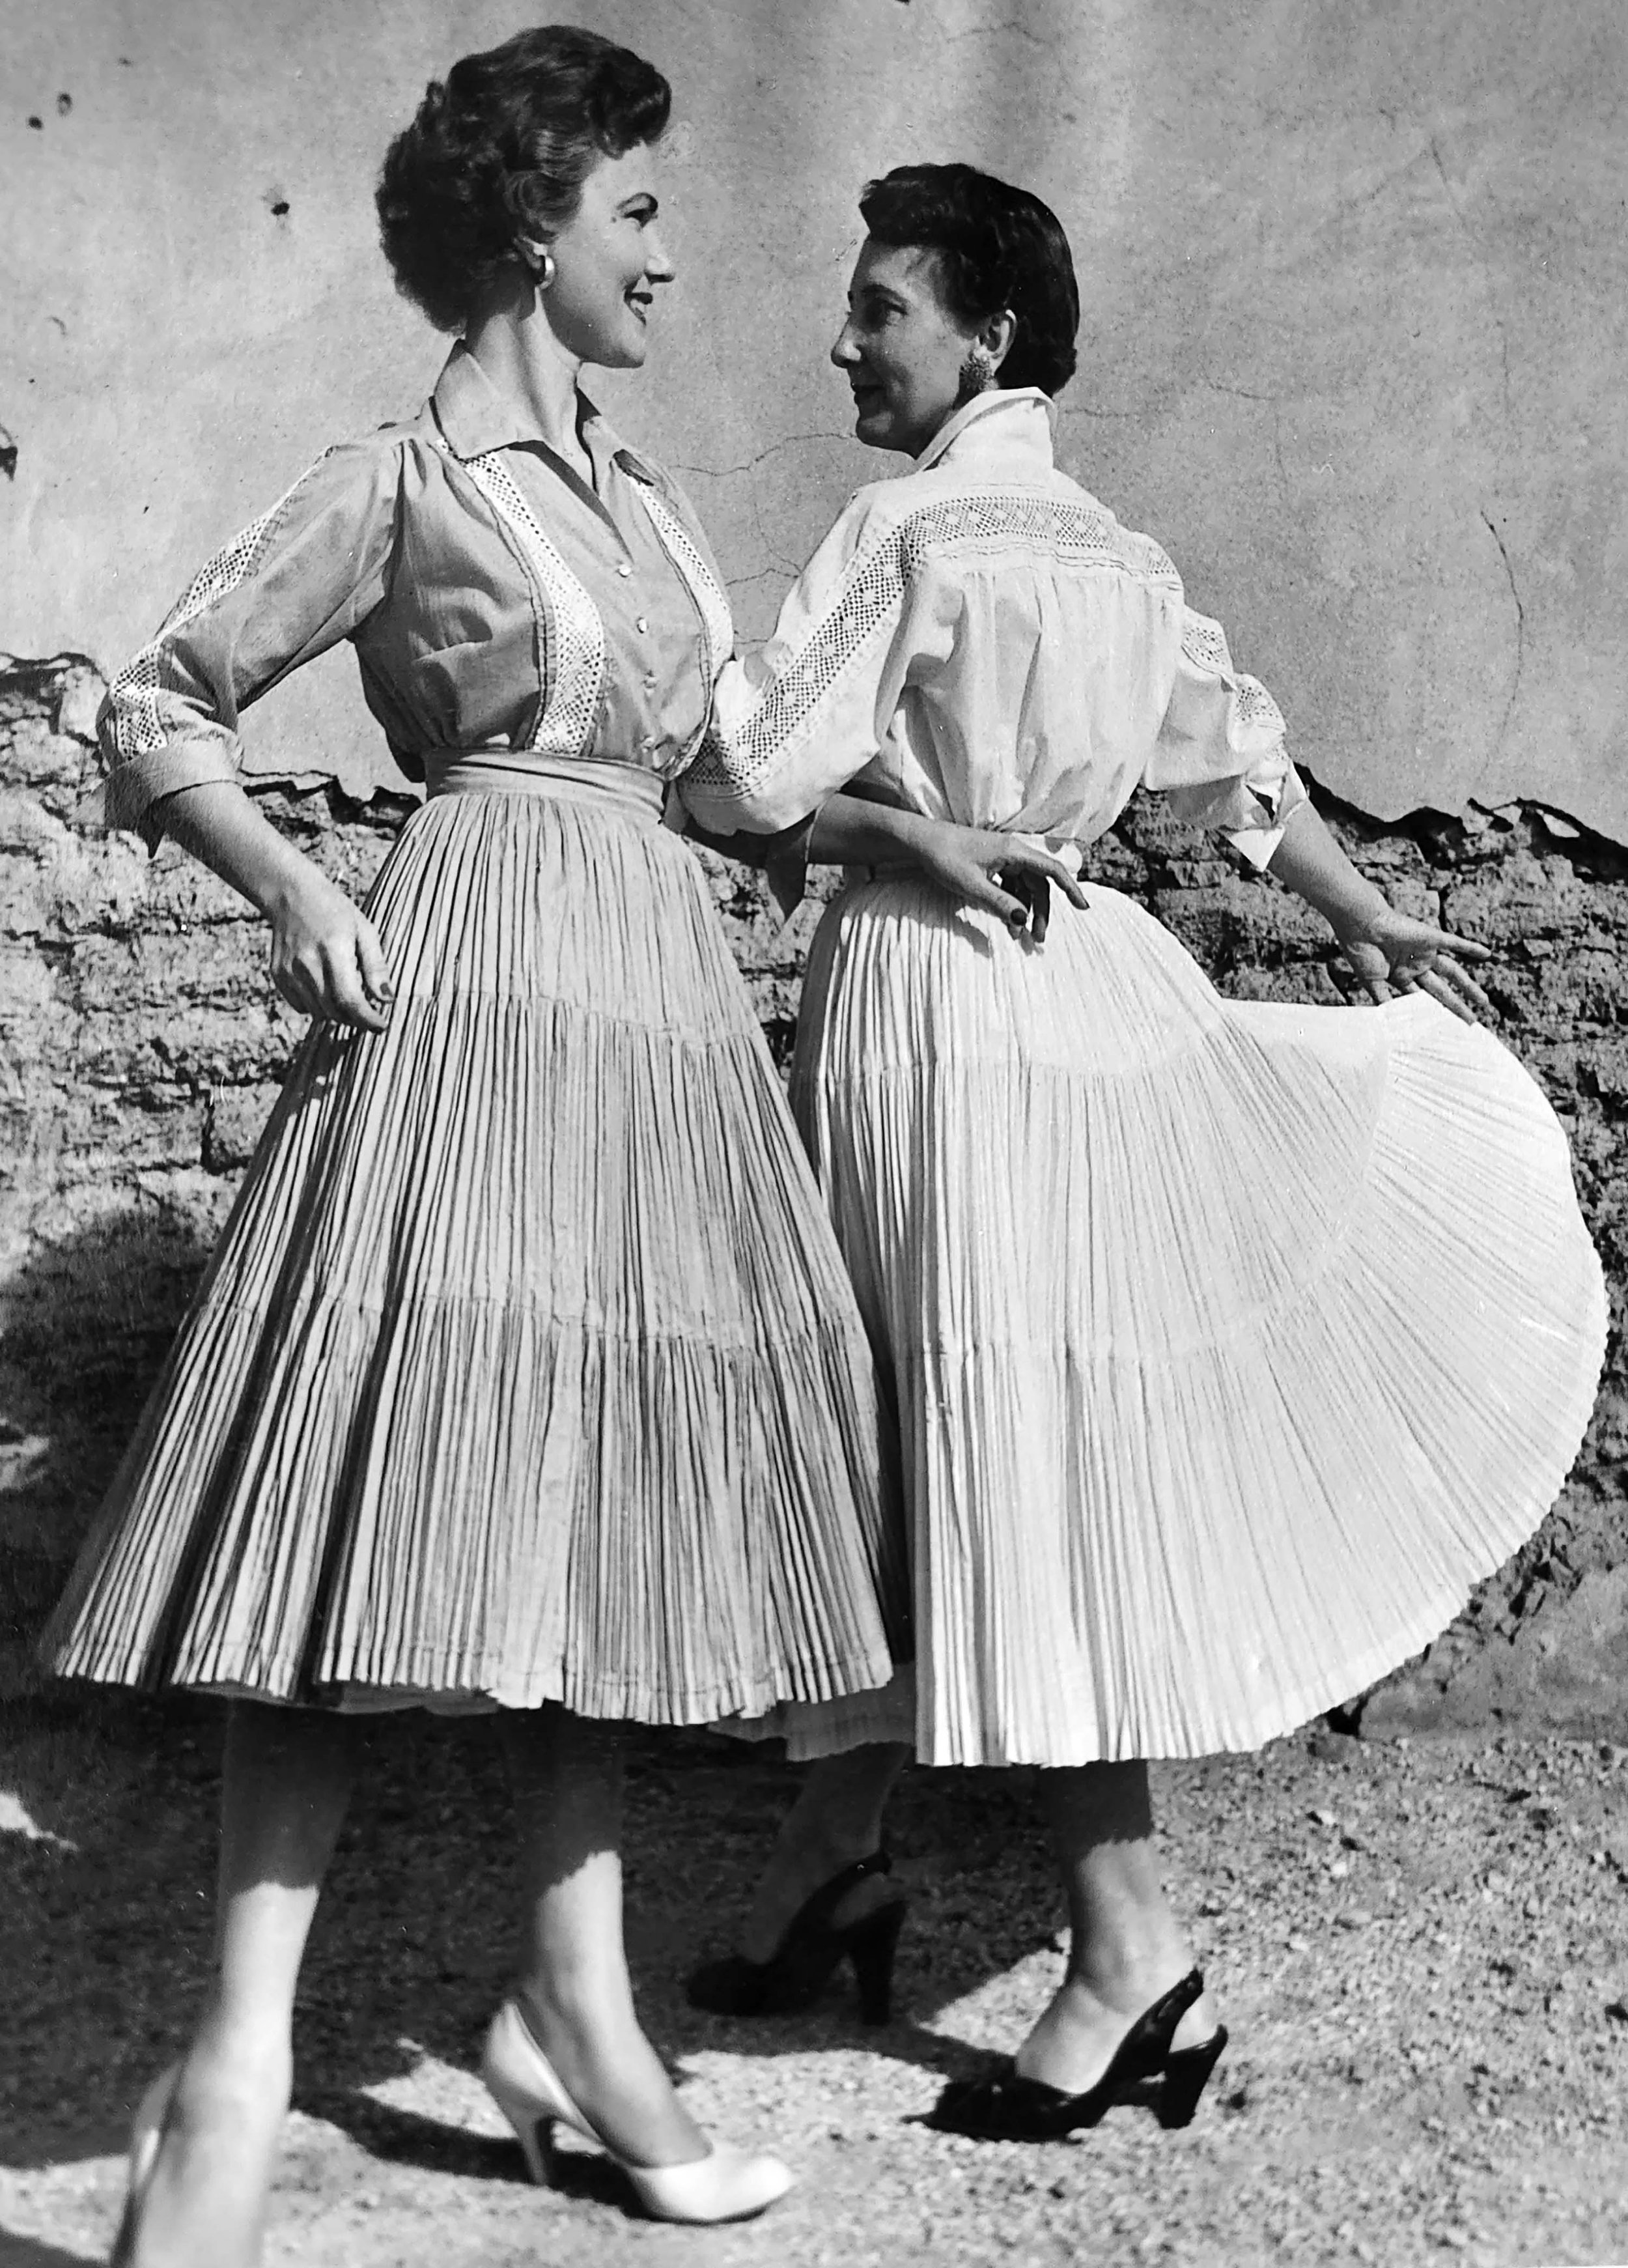 Odessa LaFont (on the right) modeling a fiesta dress